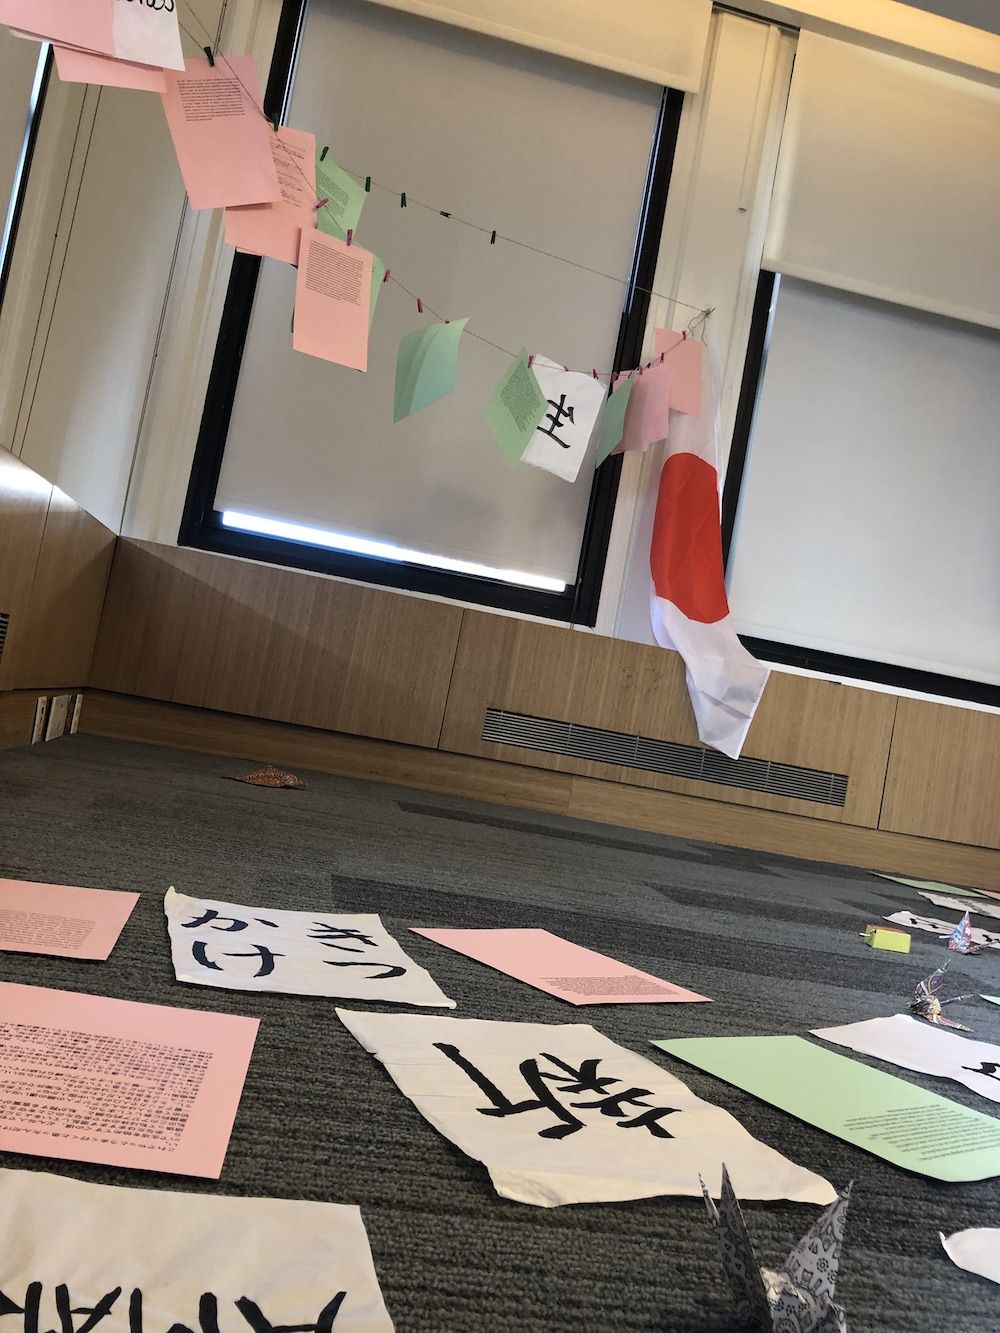 Installation in the corner of a room with a clothesline with pink and green papers with text and Japanese characters hang and are also scattered on the floor